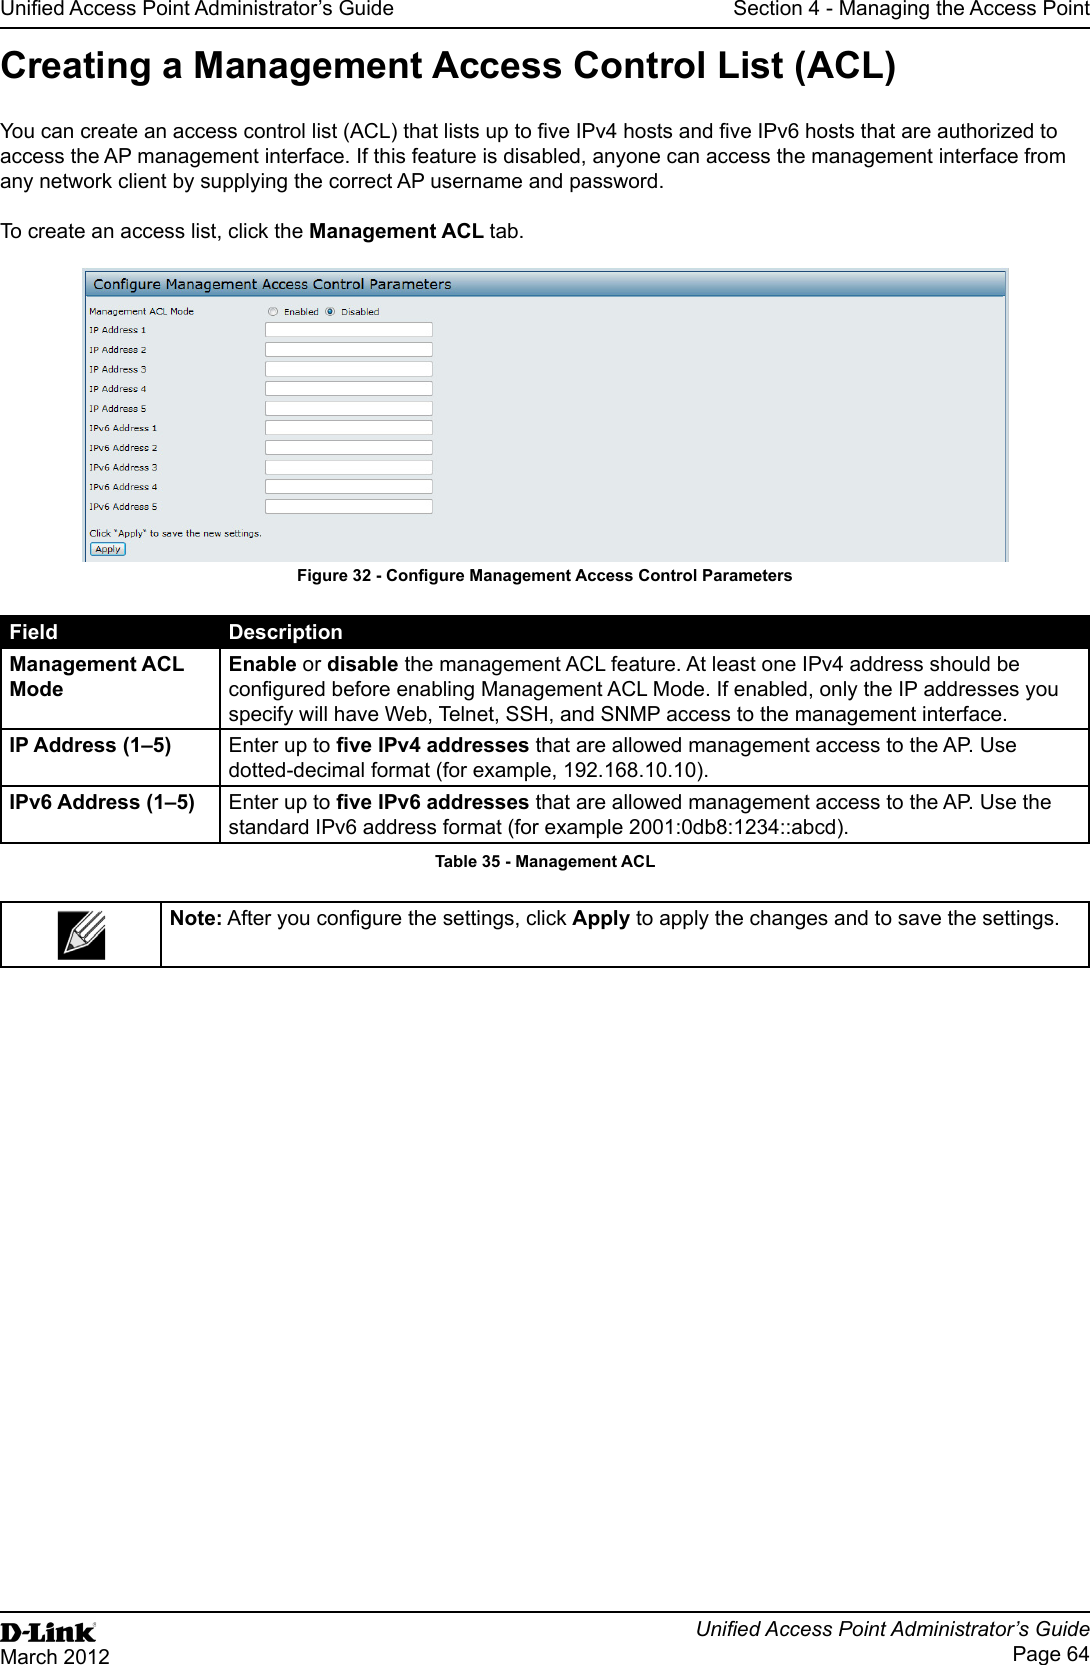 Unied Access Point Administrator’s GuideUnied Access Point Administrator’s GuidePage 64March 2012Section 4 - Managing the Access PointCreating a Management Access Control List (ACL)You can create an access control list (ACL) that lists up to ve IPv4 hosts and ve IPv6 hosts that are authorized to access the AP management interface. If this feature is disabled, anyone can access the management interface from any network client by supplying the correct AP username and password.To create an access list, click the Management ACL tab.Figure 32 - Congure Management Access Control ParametersField DescriptionManagement ACL ModeEnable or disable the management ACL feature. At least one IPv4 address should be congured before enabling Management ACL Mode. If enabled, only the IP addresses you specify will have Web, Telnet, SSH, and SNMP access to the management interface.IP Address (1–5) Enter up to ve IPv4 addresses that are allowed management access to the AP. Use dotted-decimal format (for example, 192.168.10.10).IPv6 Address (1–5) Enter up to ve IPv6 addresses that are allowed management access to the AP. Use the standard IPv6 address format (for example 2001:0db8:1234::abcd).Table 35 - Management ACLNote: After you congure the settings, click Apply to apply the changes and to save the settings.